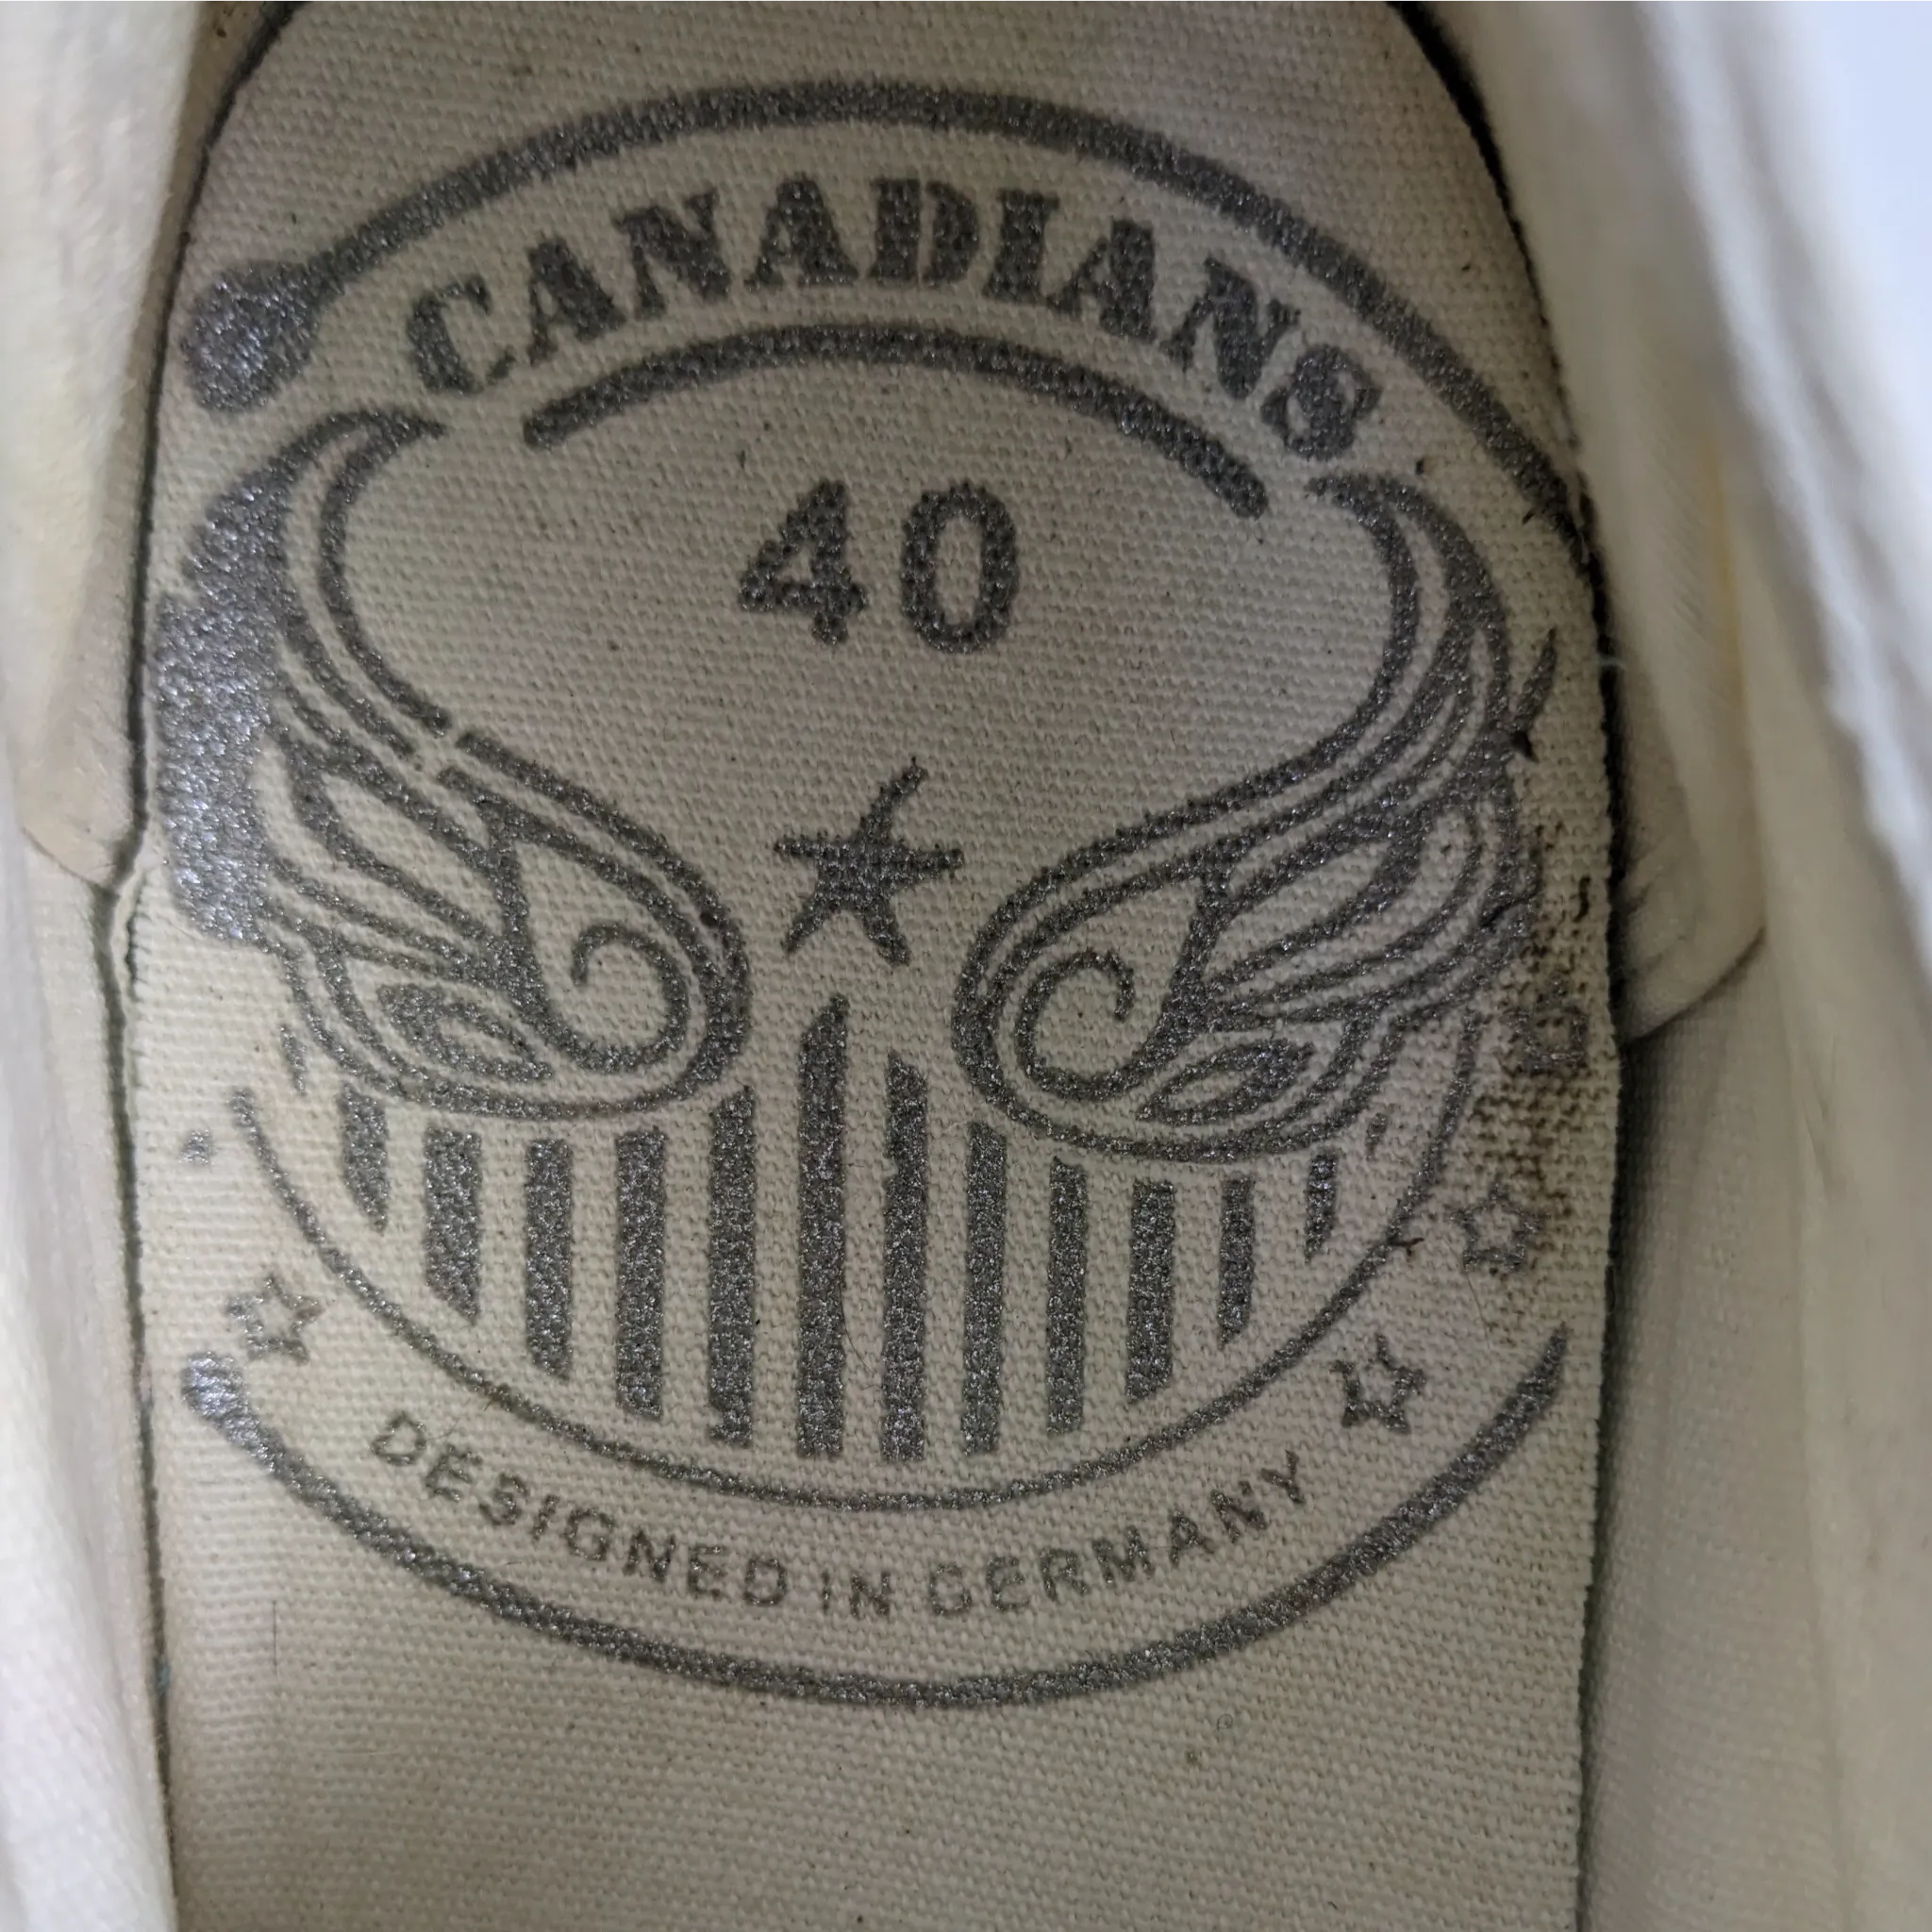 Canadians White Sneakers